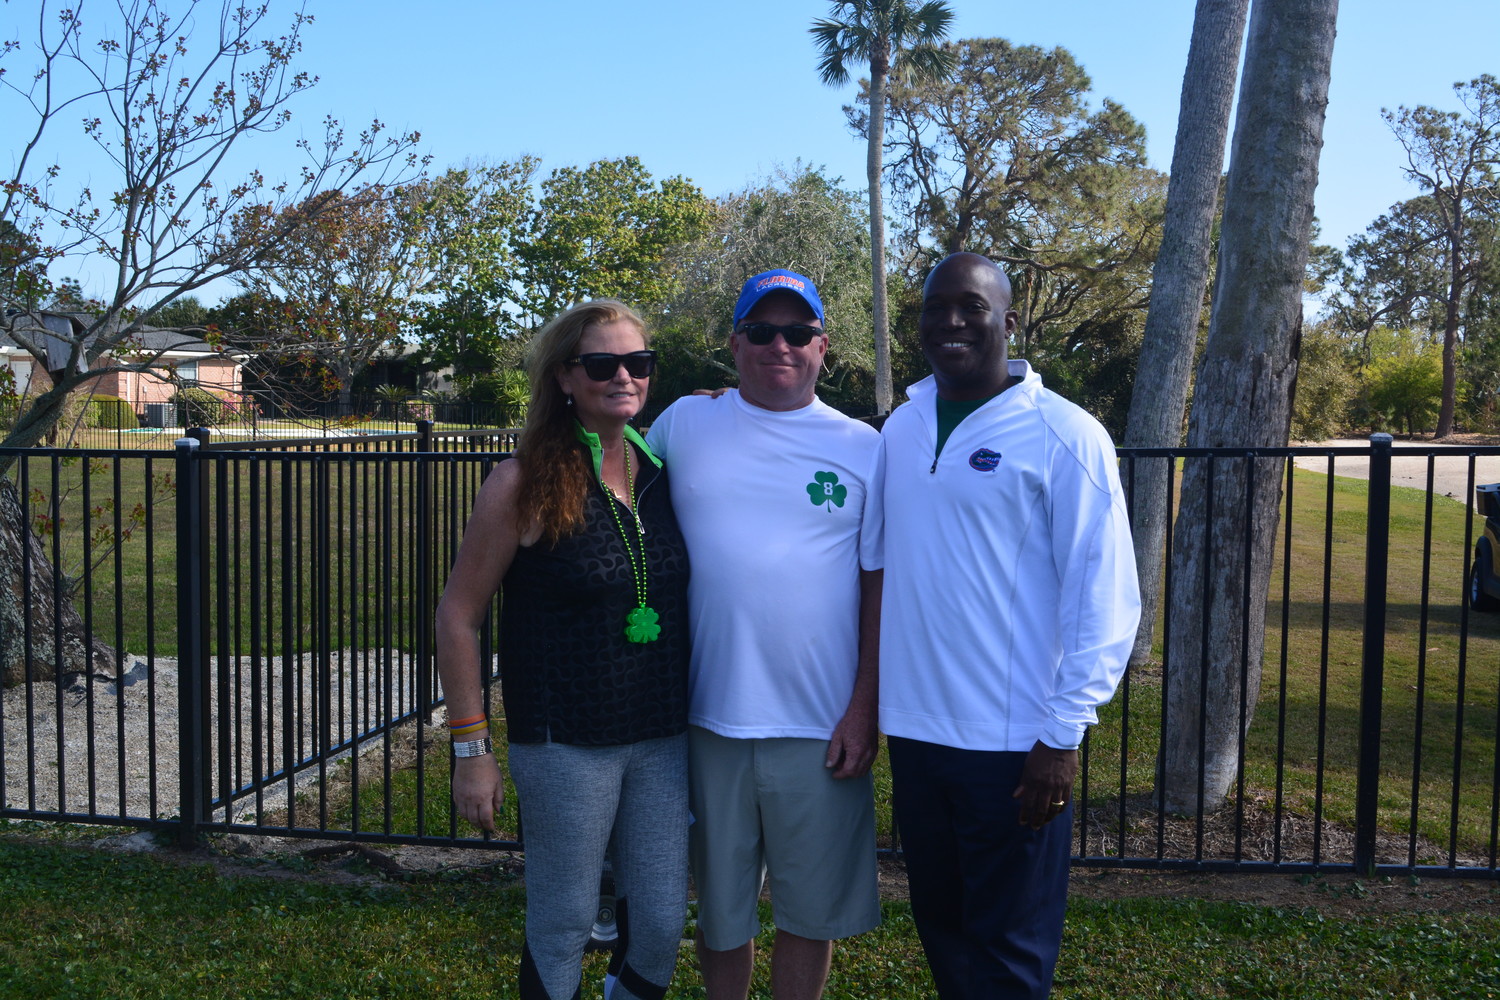 Deb and Sandy Chapin gather with Dr. Duane Mitchell at the second annual Jamie Chapin Classic golf tournament March 17 at the Ponte Vedra Inn & Club.